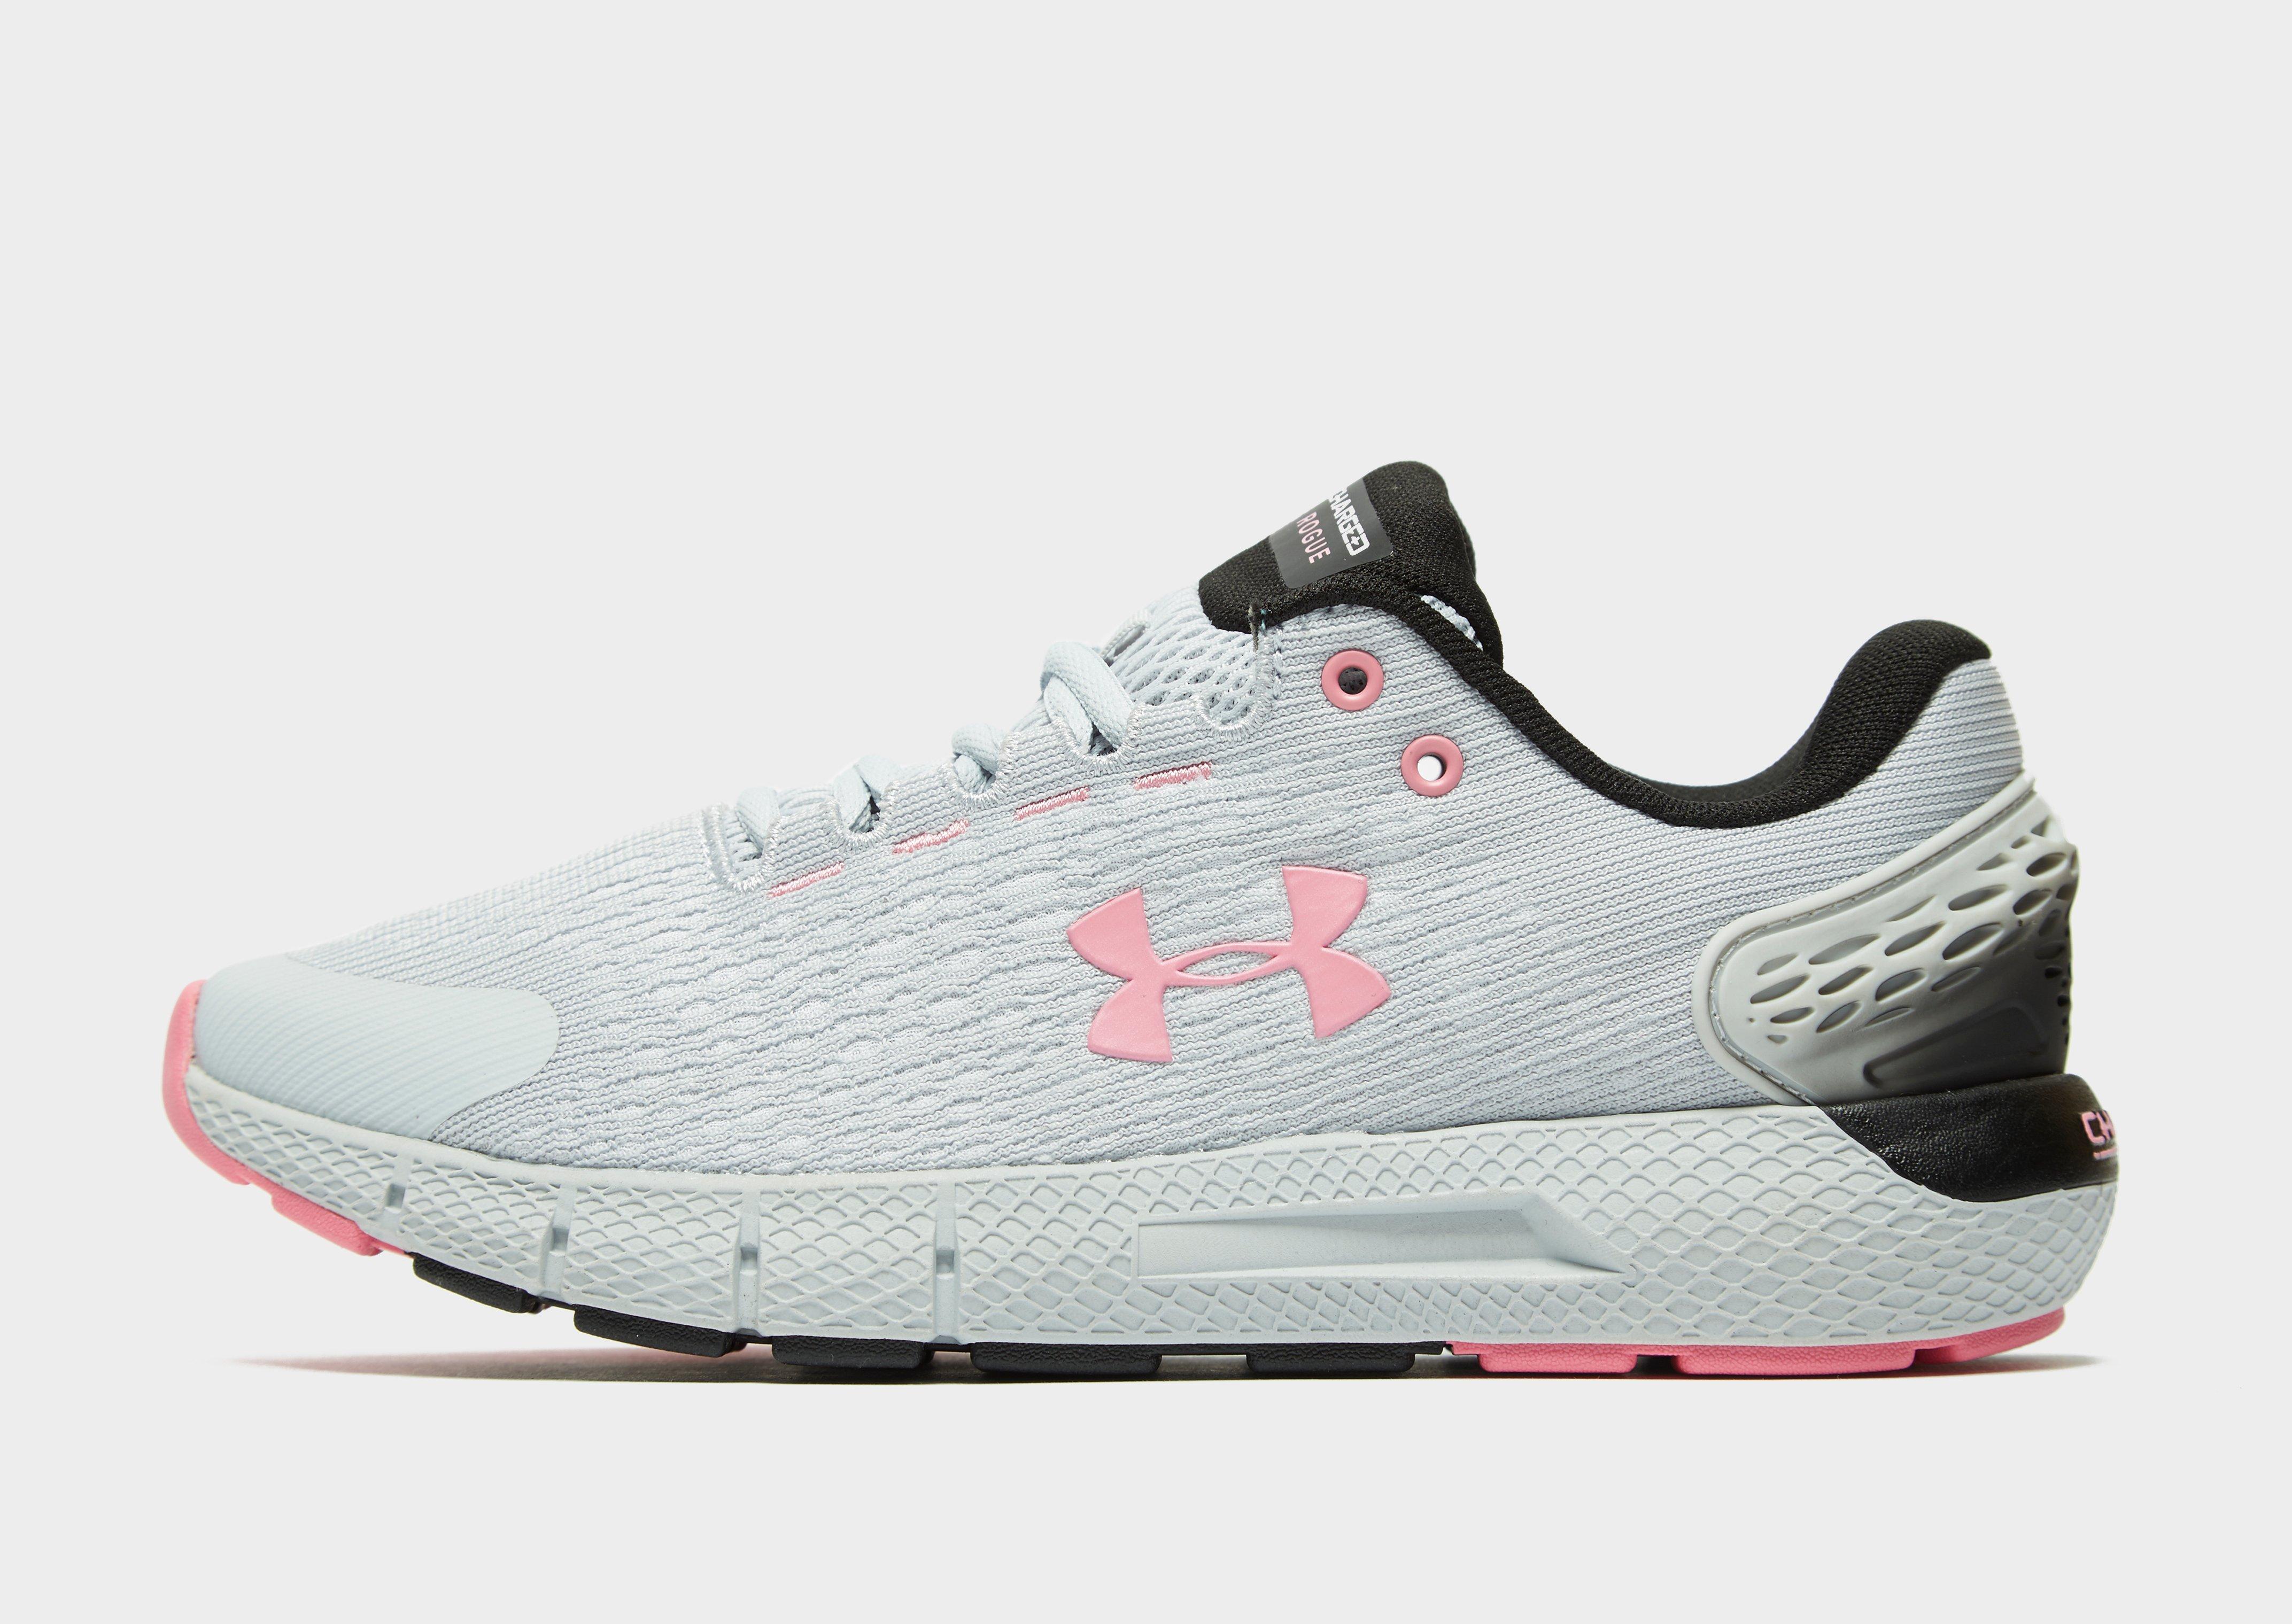 under armour charged rouge